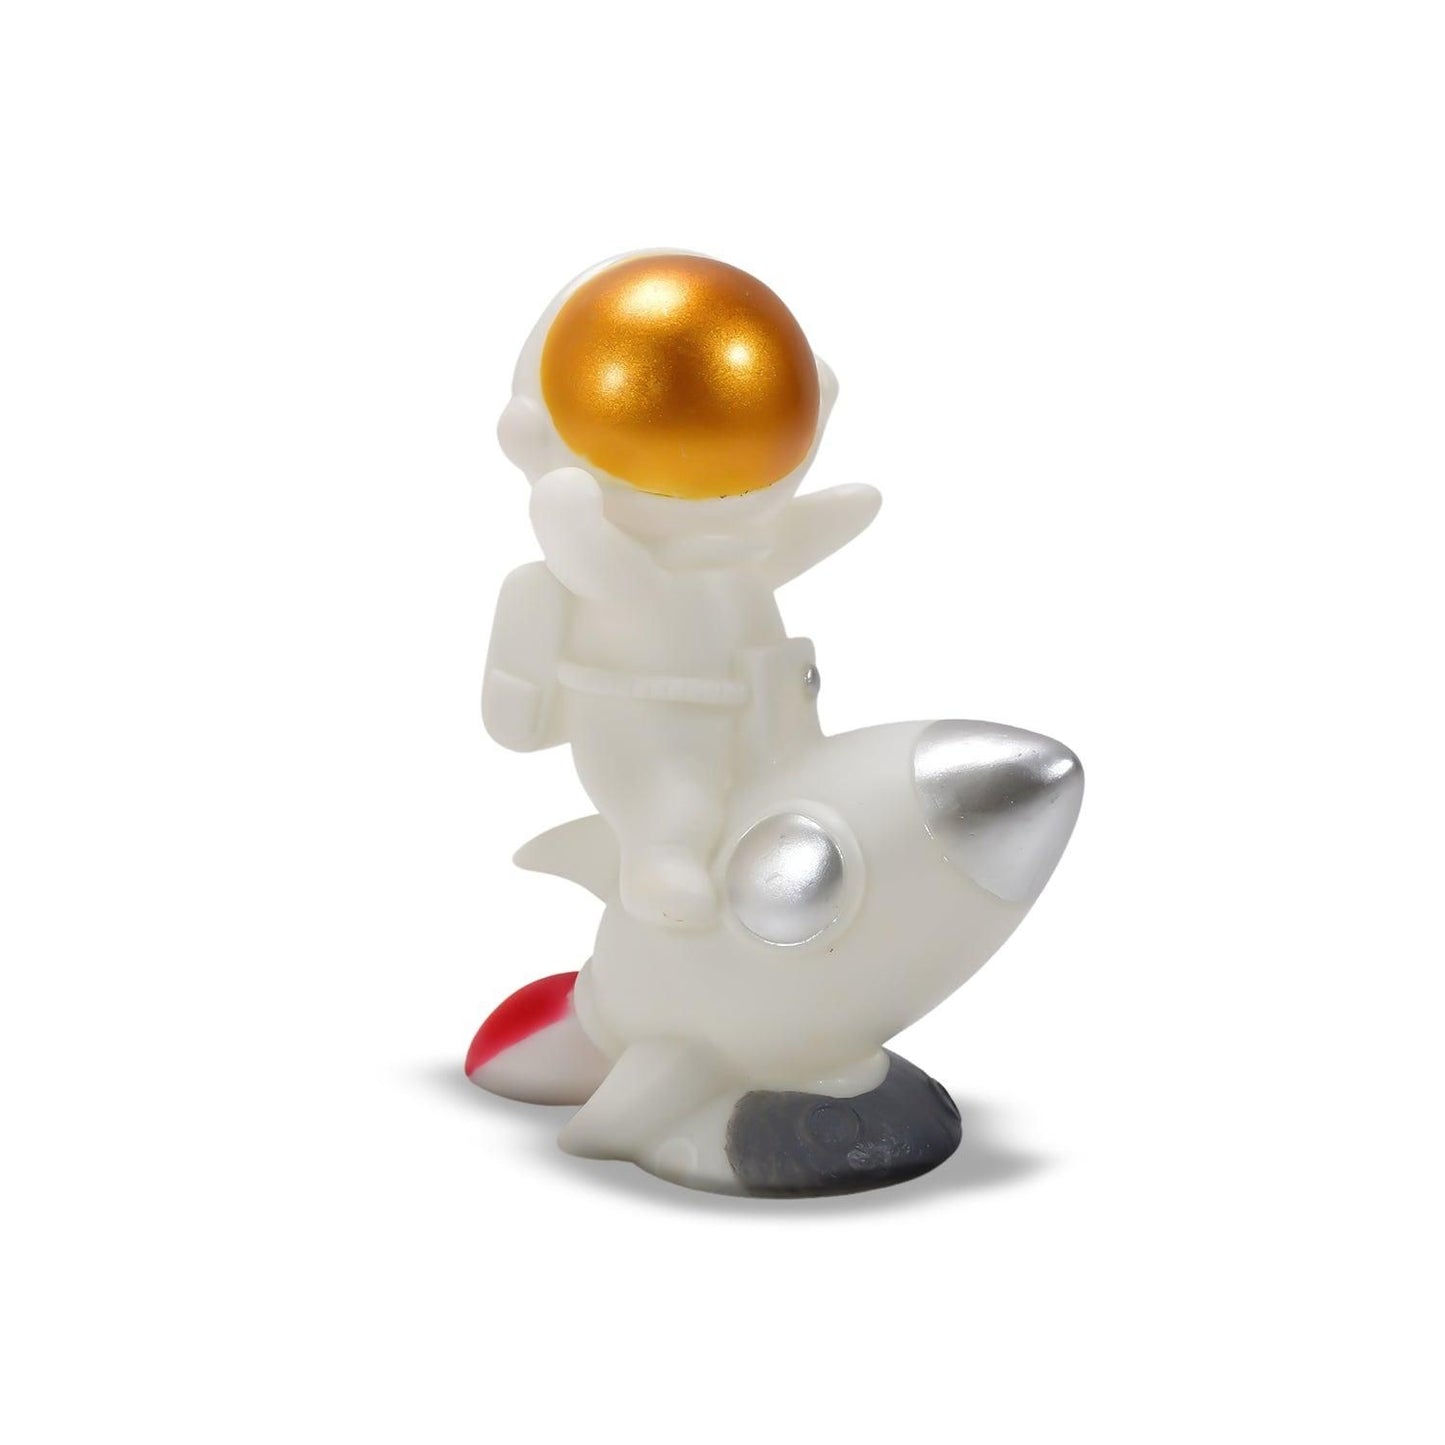 Space Astronaut Figurines Resin Crafts Home Decor